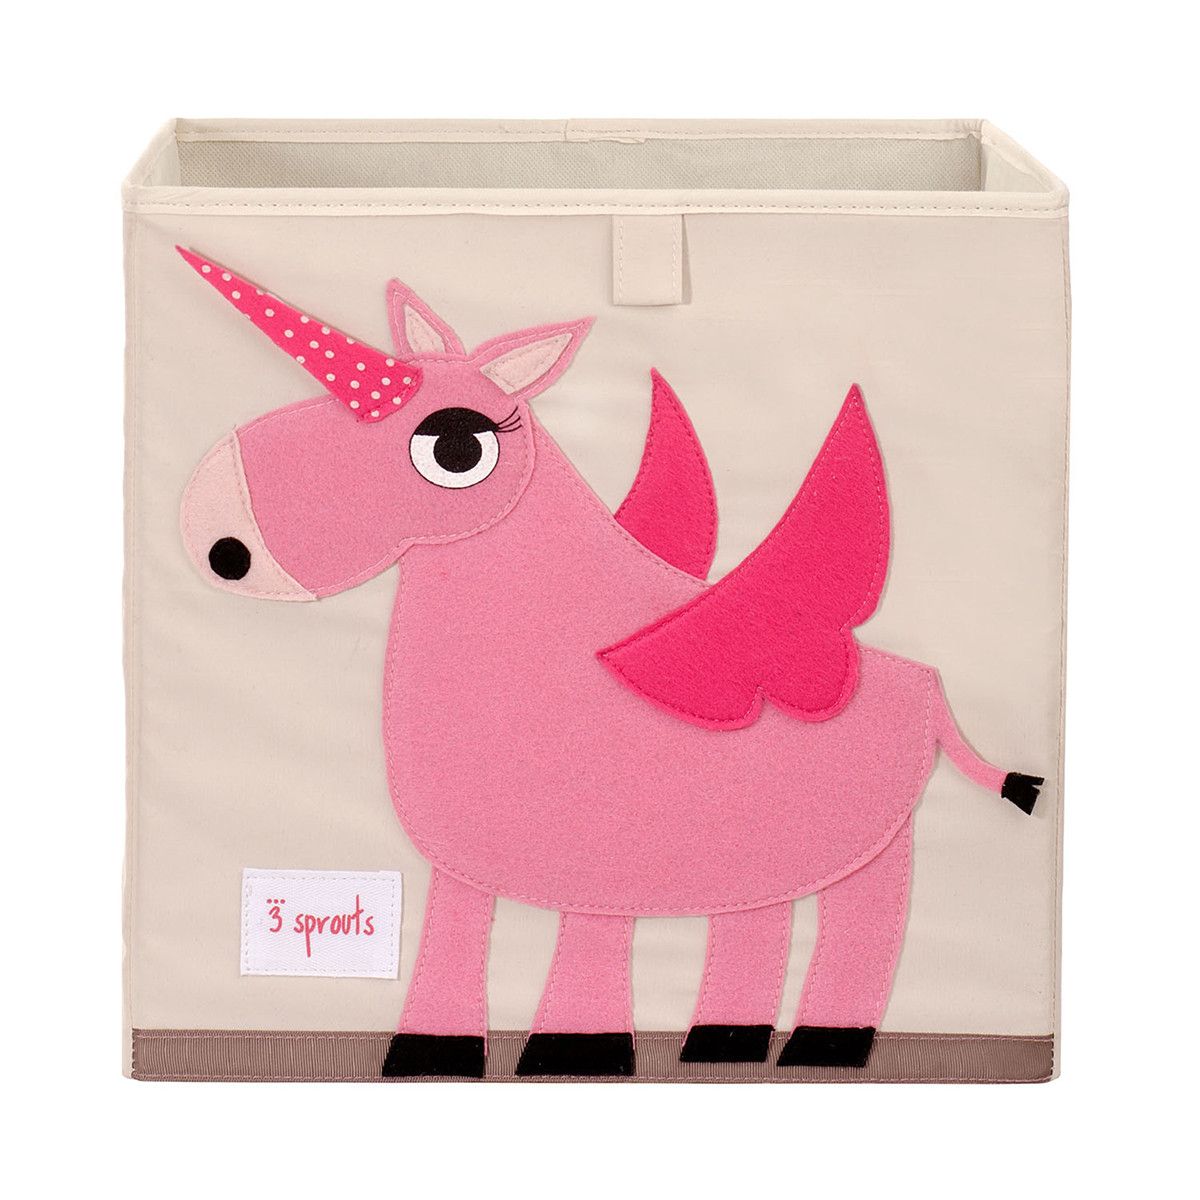 Unicorn - 3 Sprouts Storage Cube | The Container Store